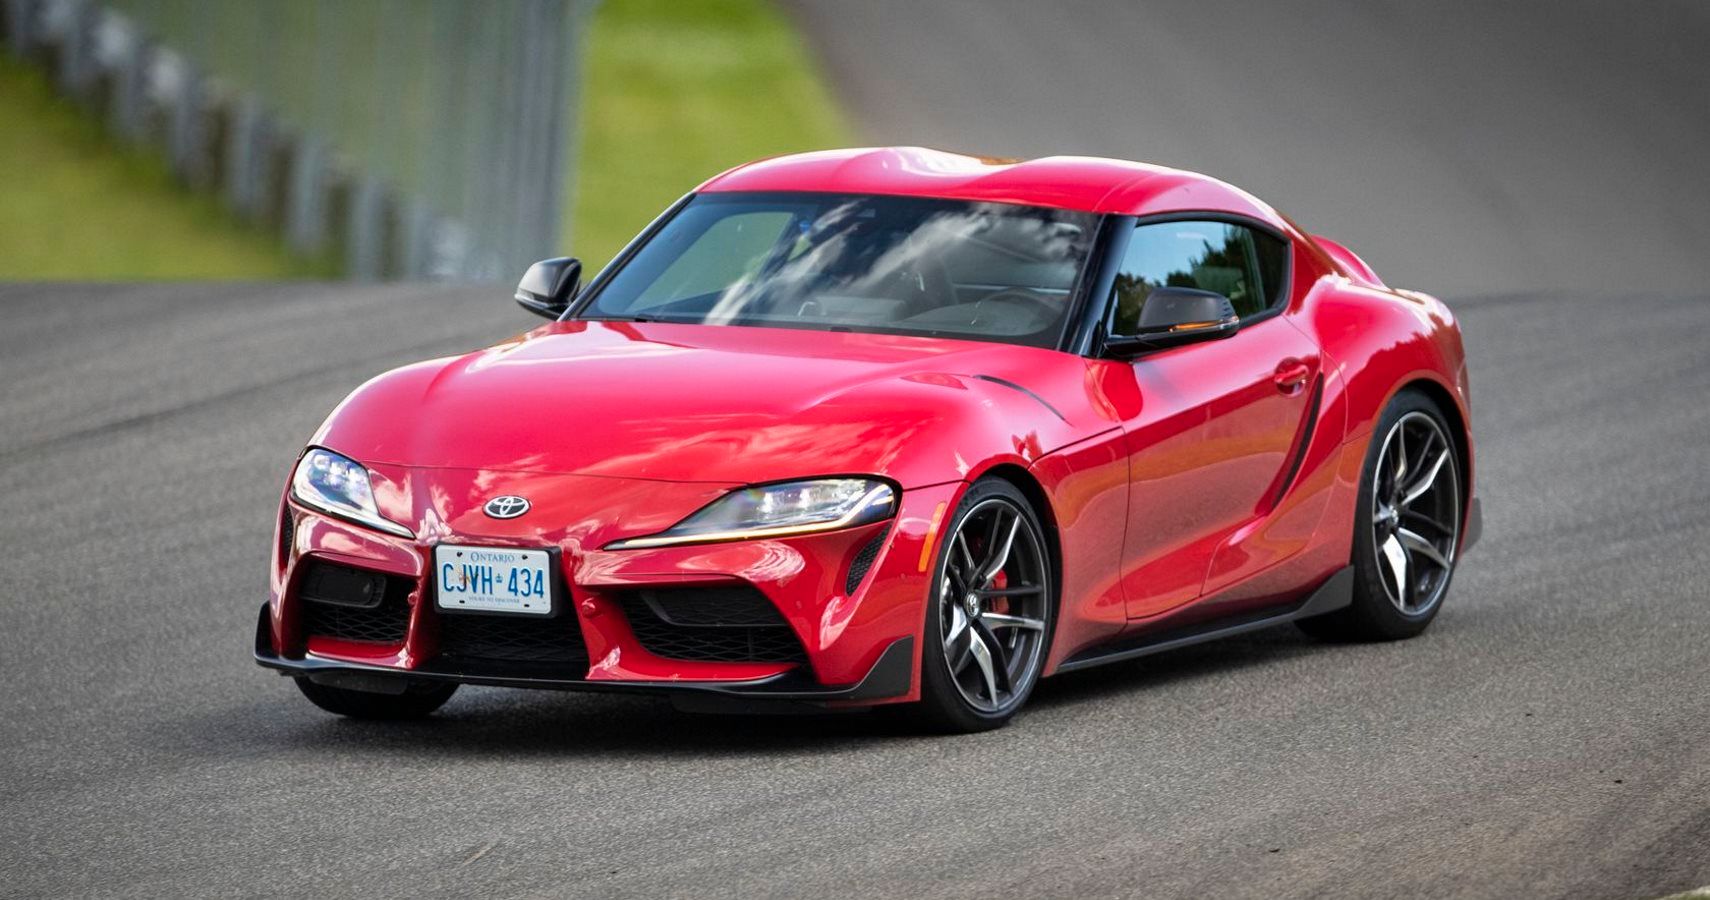 New Toyota Supra Takes On Its Sister Car, The BMW Z4, In Drag And Rolling Races